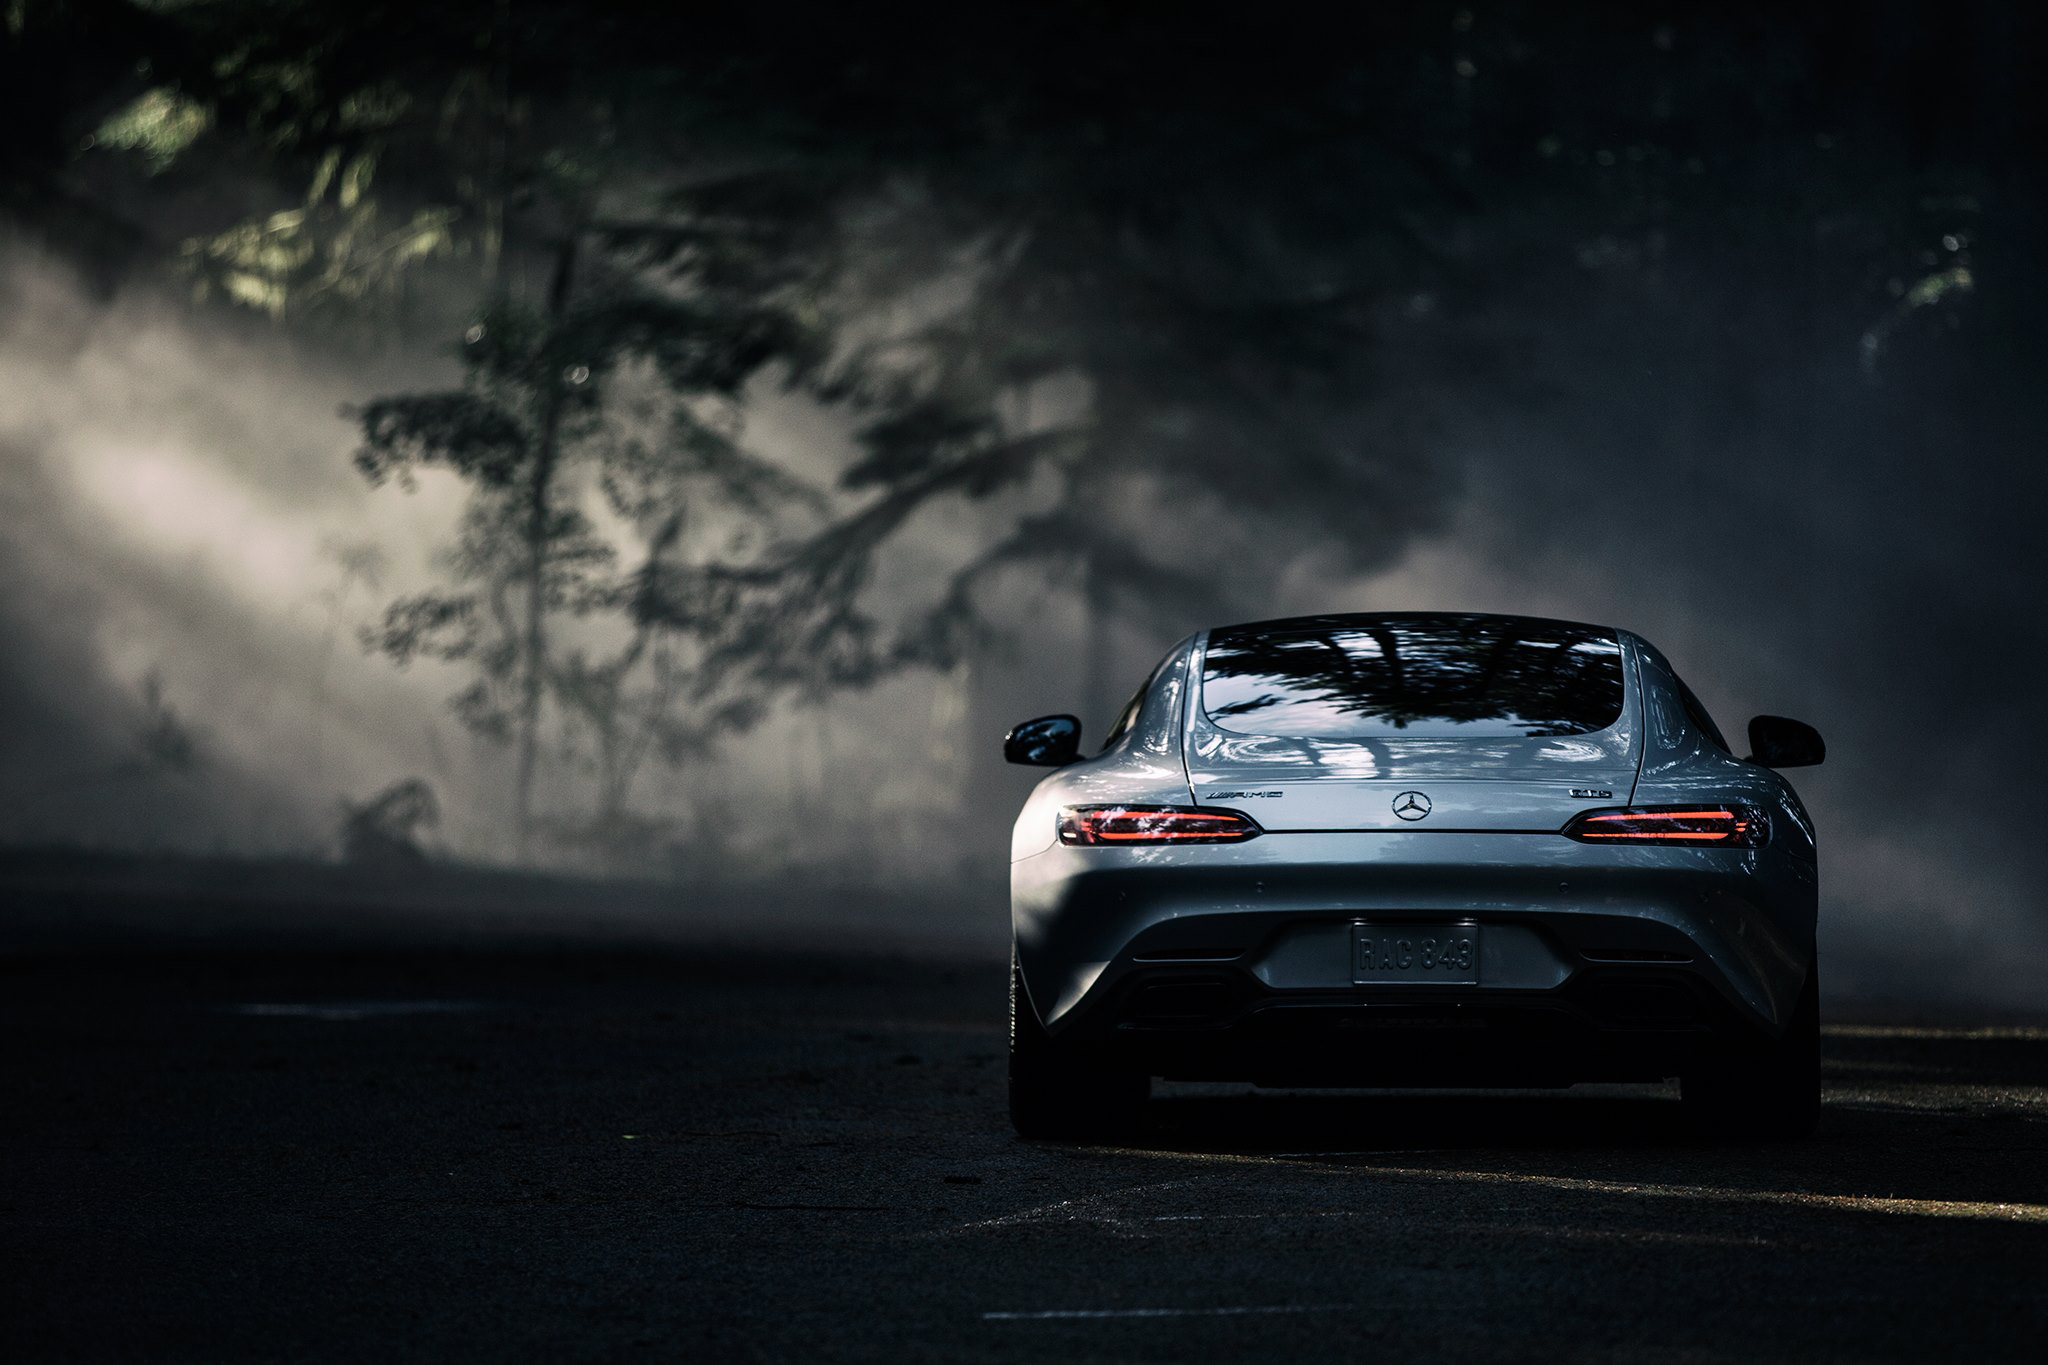 cars, mercedes benz, back view, amg, gt s, rear view, 2016 iphone wallpaper